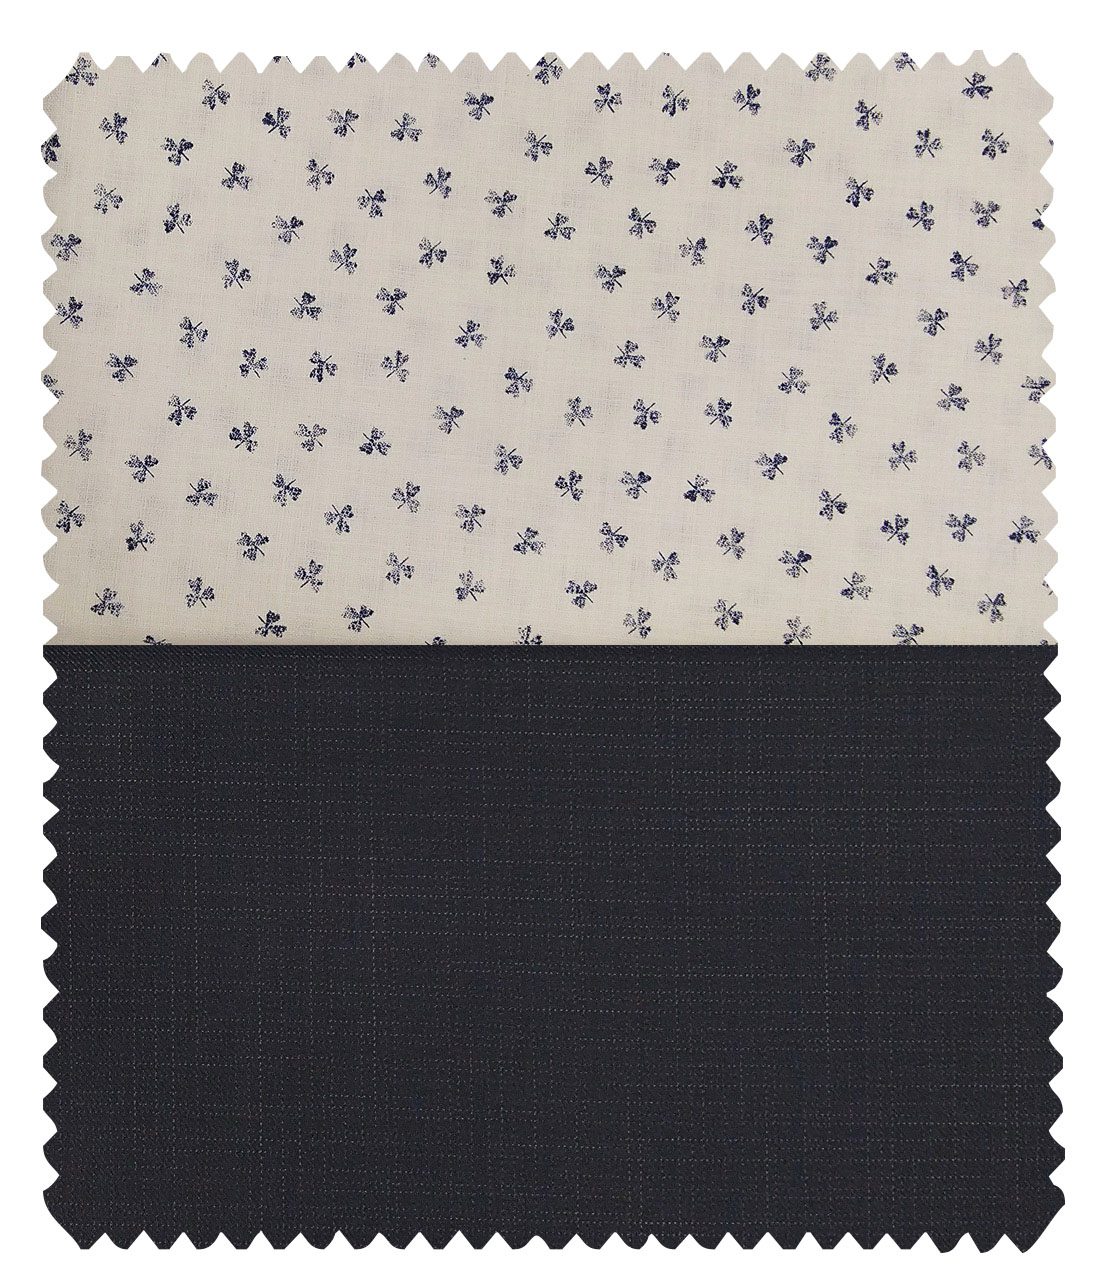 Combo of Raymond Dark Blue Self Design Trouser Fabric With Monza Off-White 100% Cotton Printed Chambray Shirt Fabric (Unstitched)